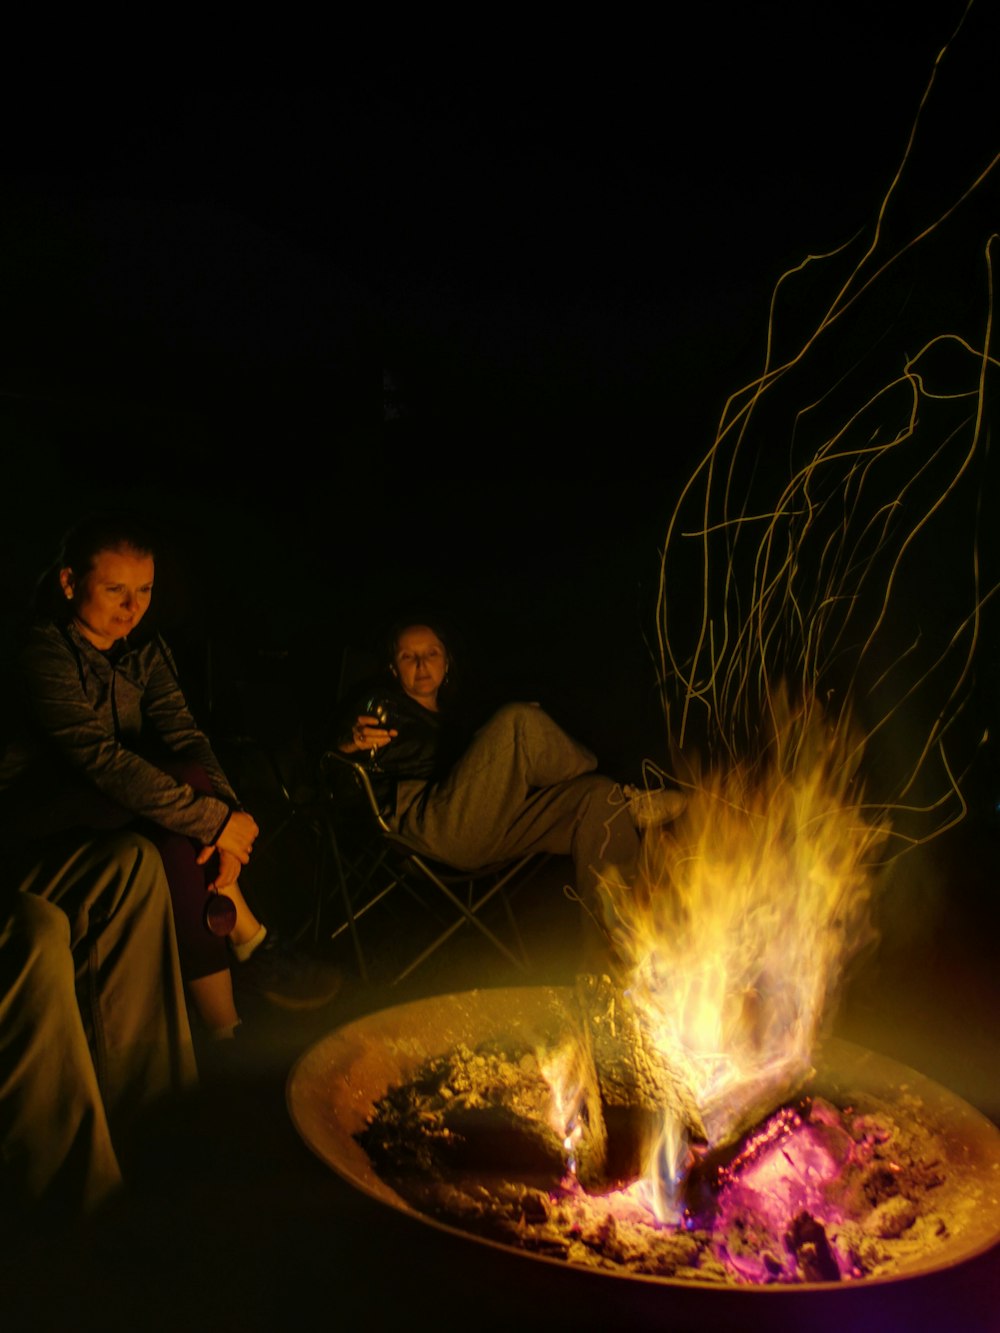 a group of people sitting around a fire pit